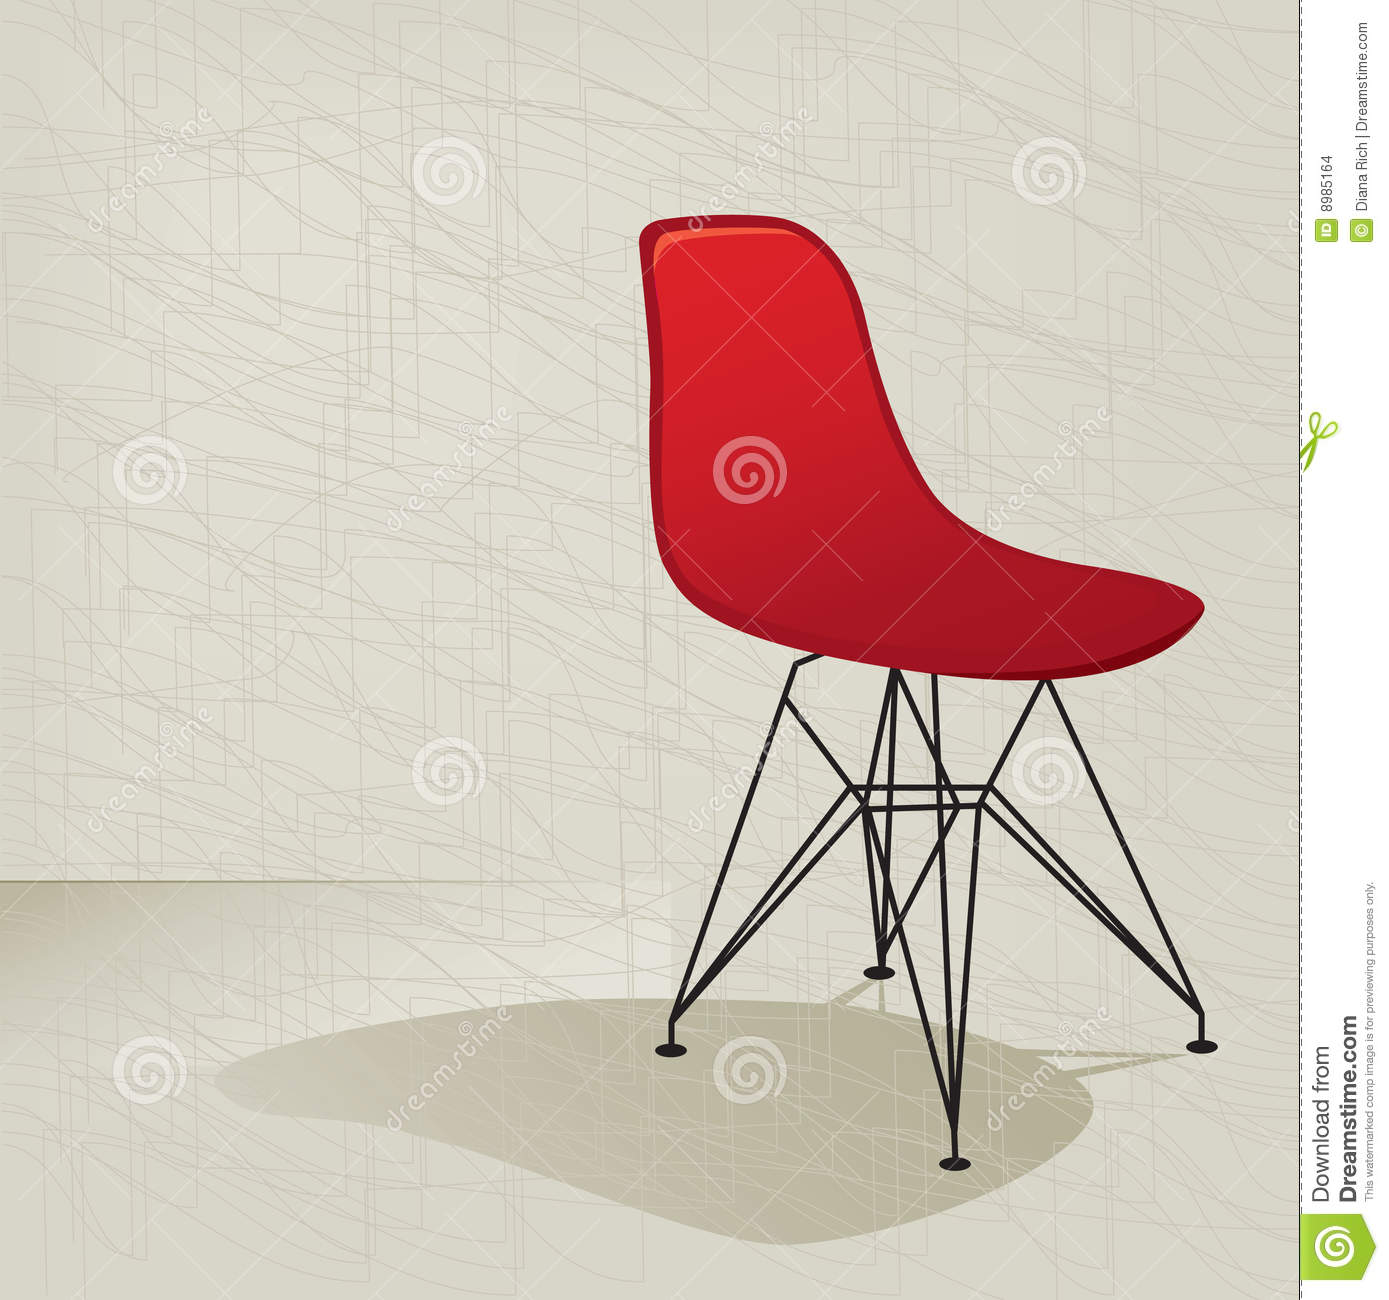 Swanky Retro Red Plastic Mid Century Modern Chair With A Subtle Modern